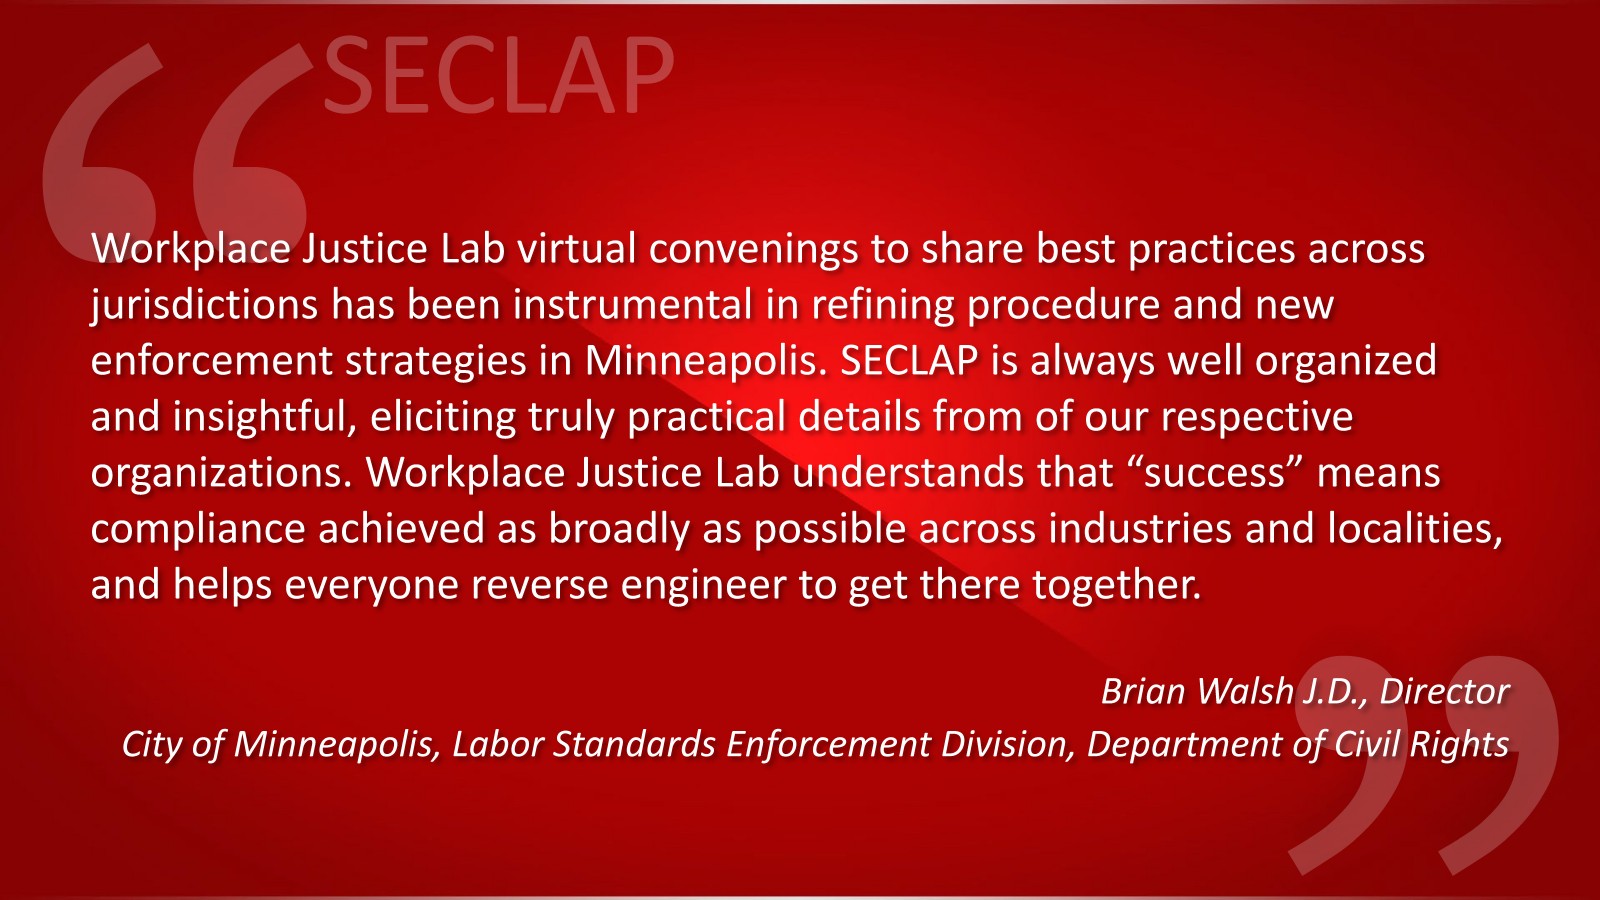 quote from Brian Walsh J.D., Director, City of Minneapolis, Labor Standards Enforcement Division, Dept of Civil Rights